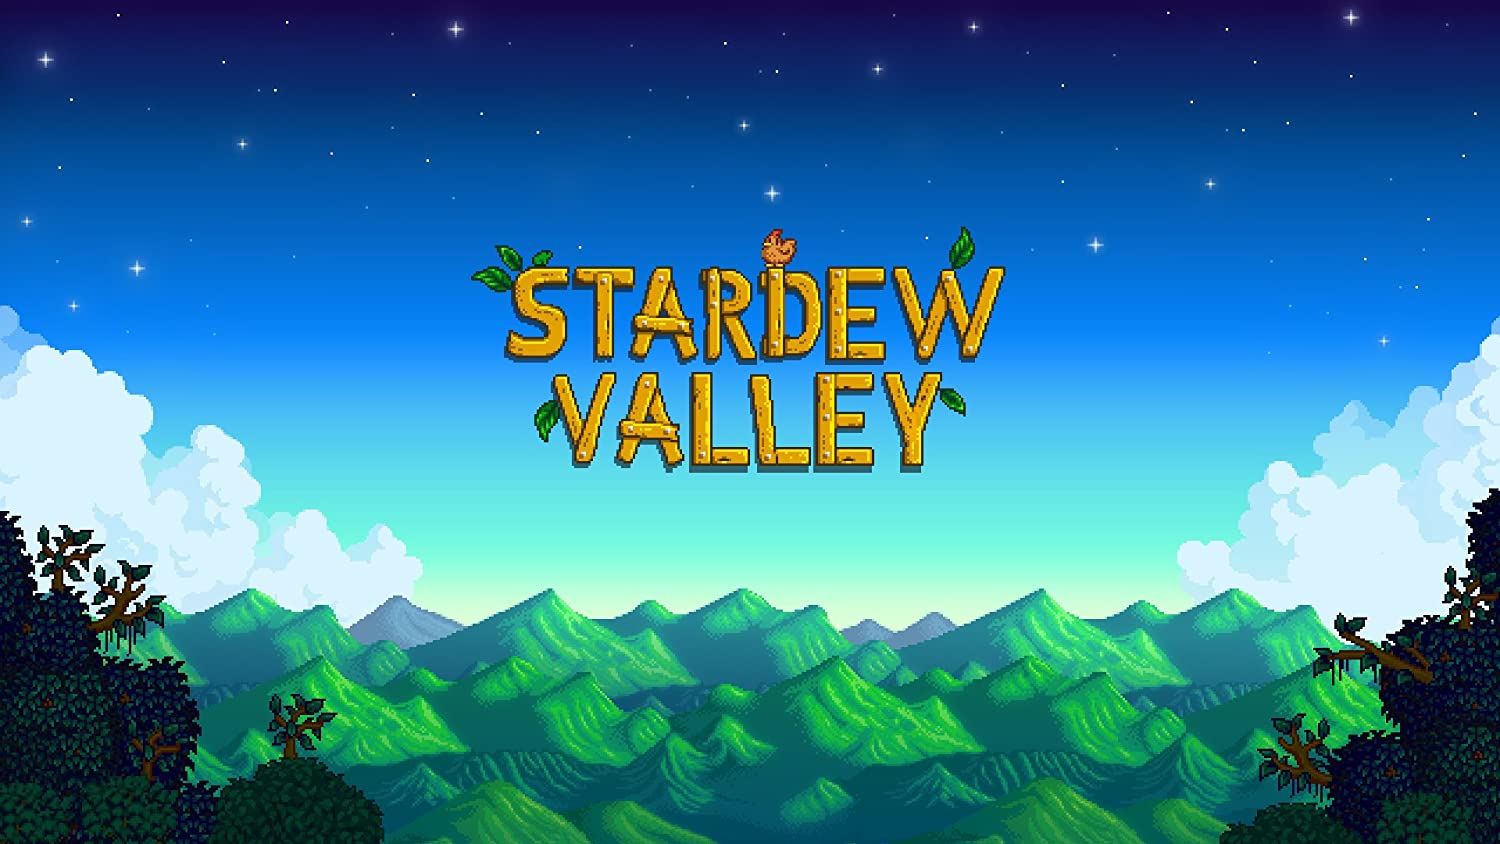 great multi-player games - fun multi-player video games - Stardew Valley